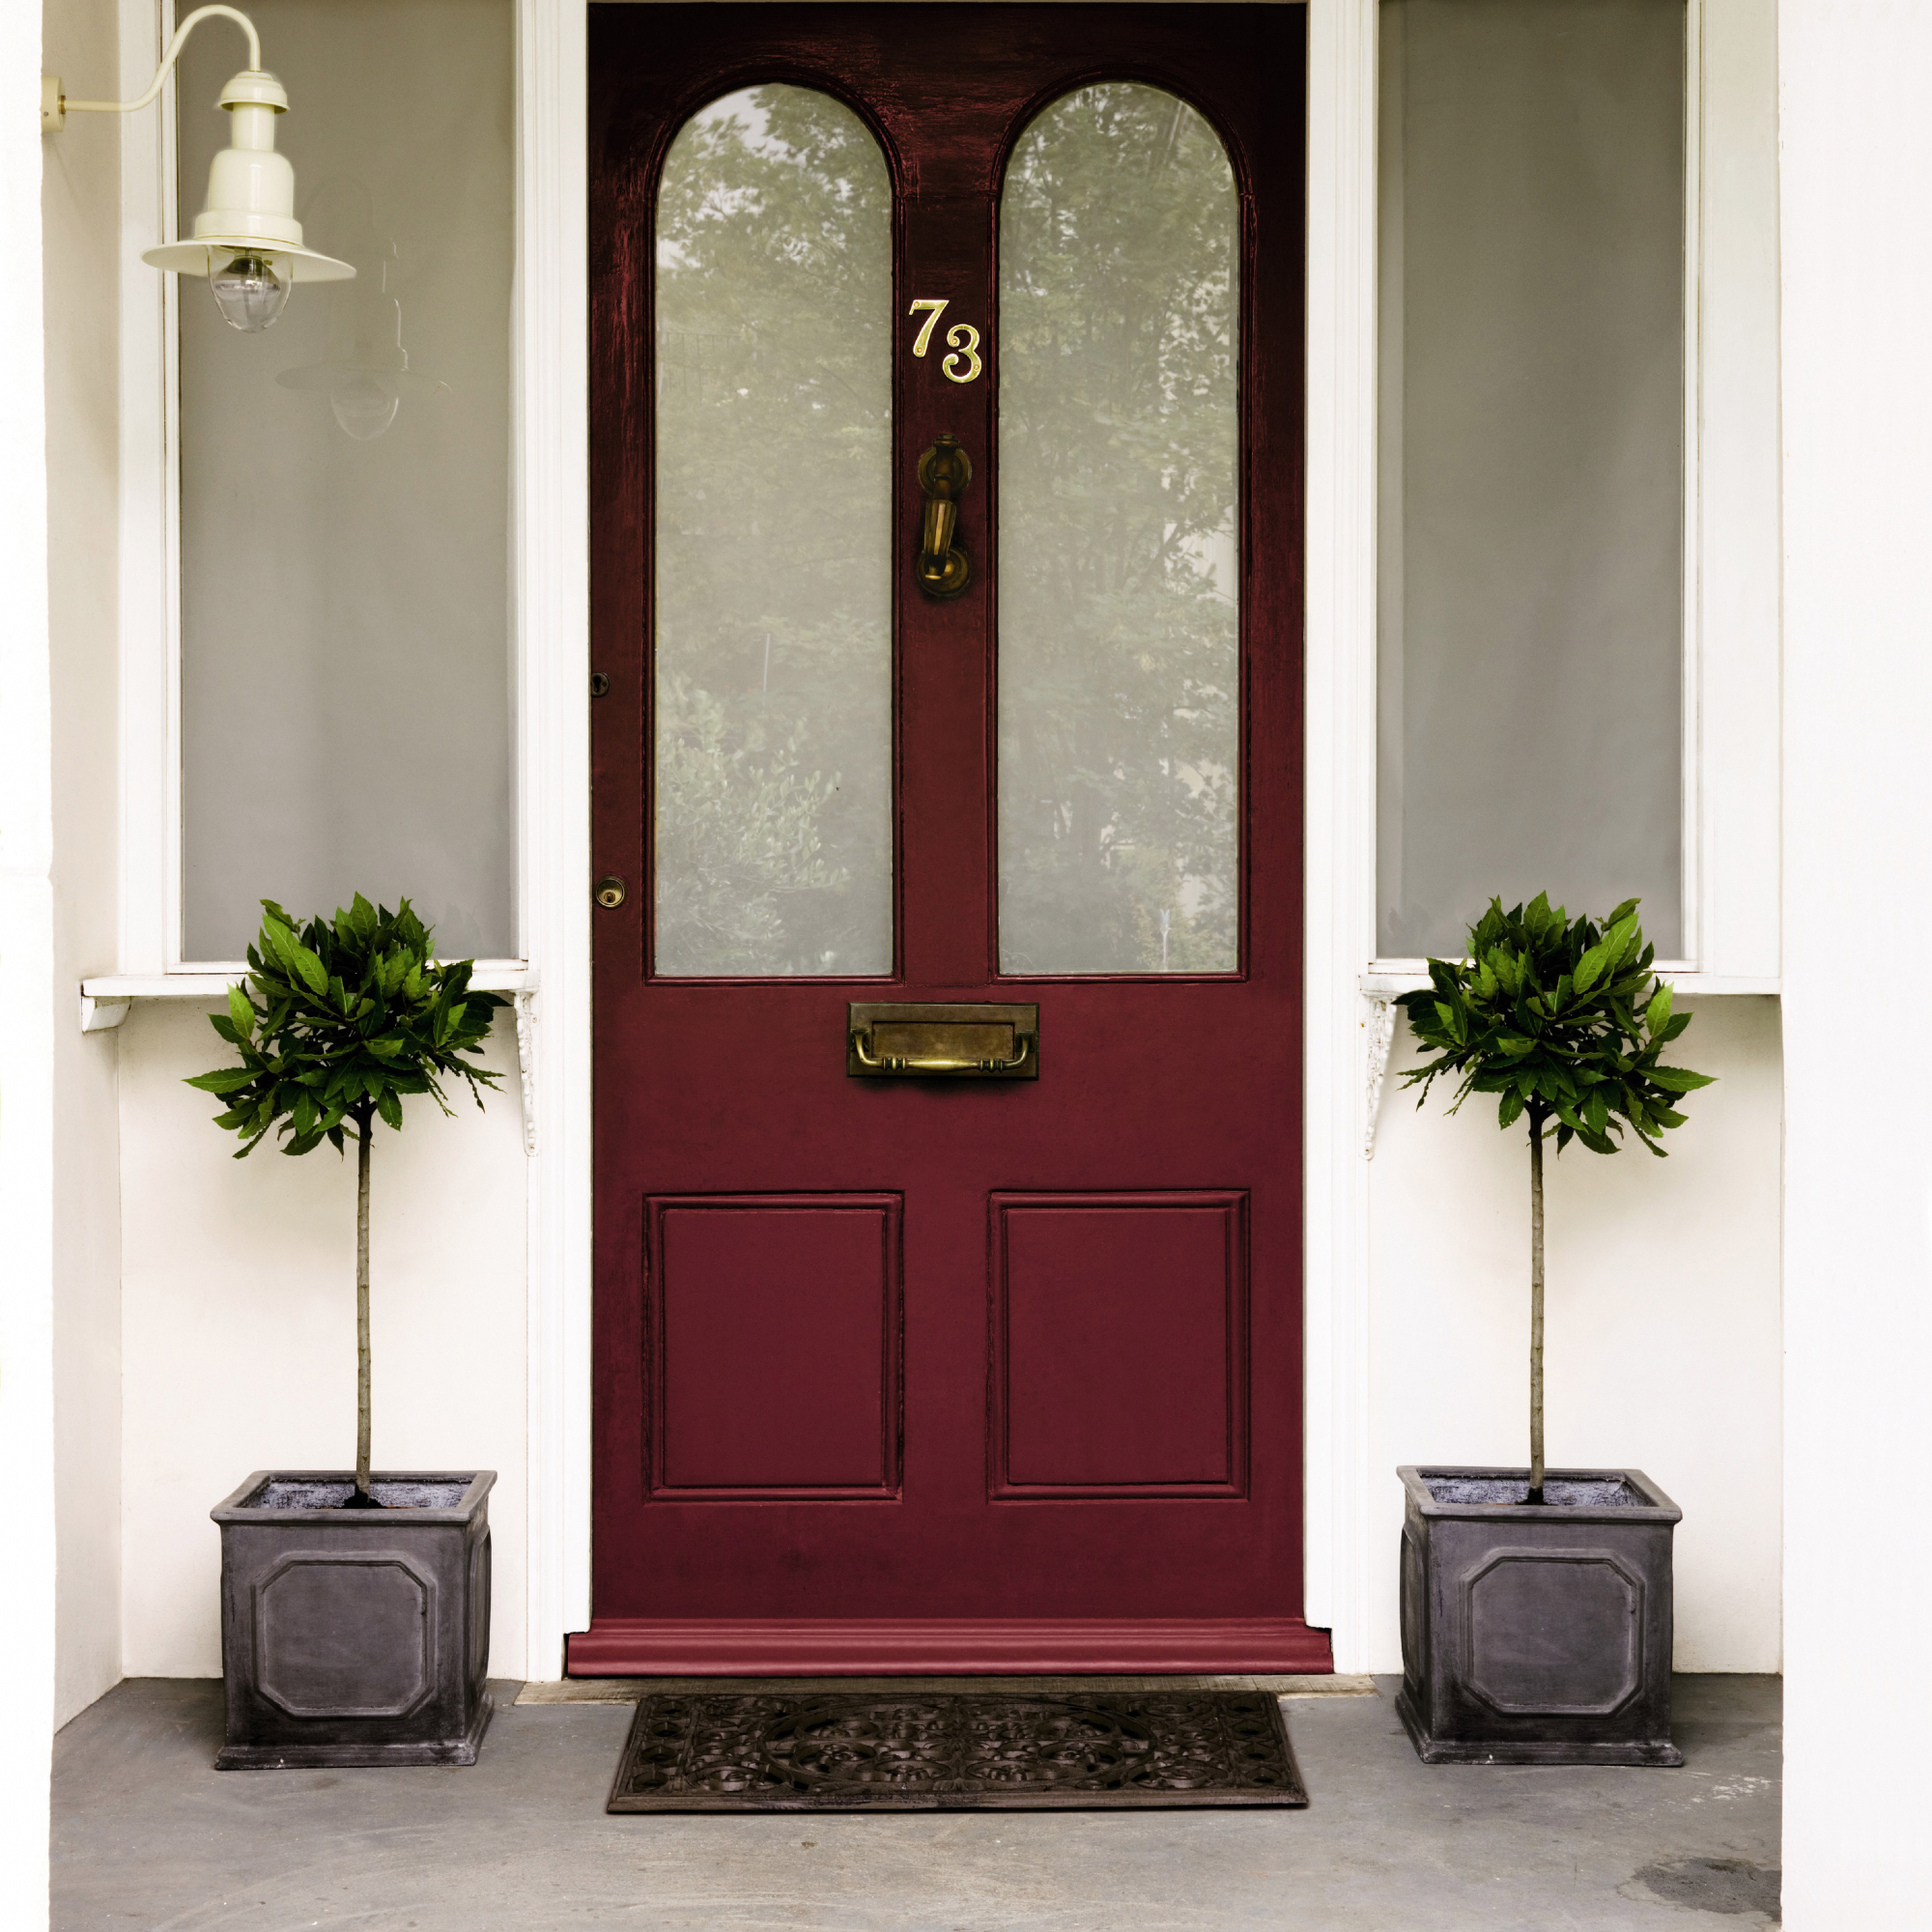 small front porch ideas, maroon front door, pair of bay trees each side, white masonry, enamel wall light, metal door mat